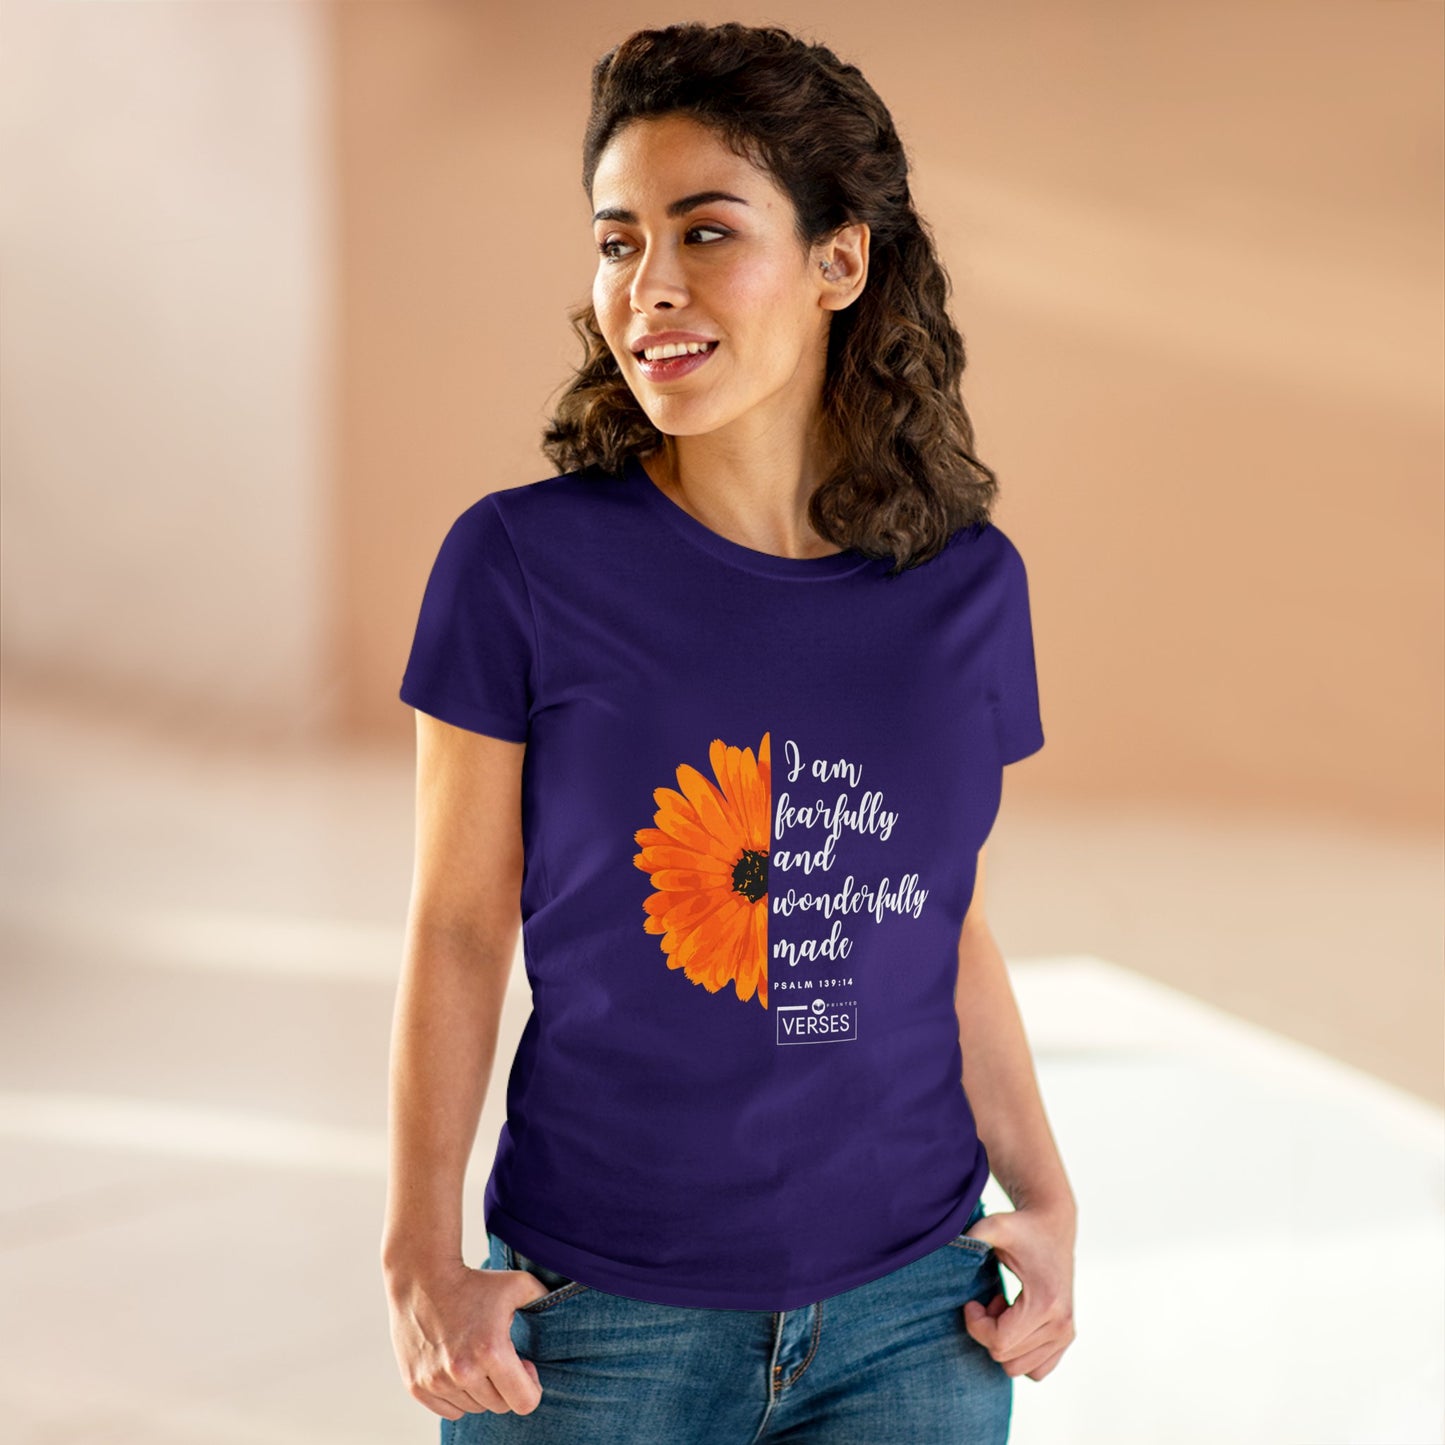 I AM FEARFULLY AND WONDERFULLY MADE - LADIES DRK TEE